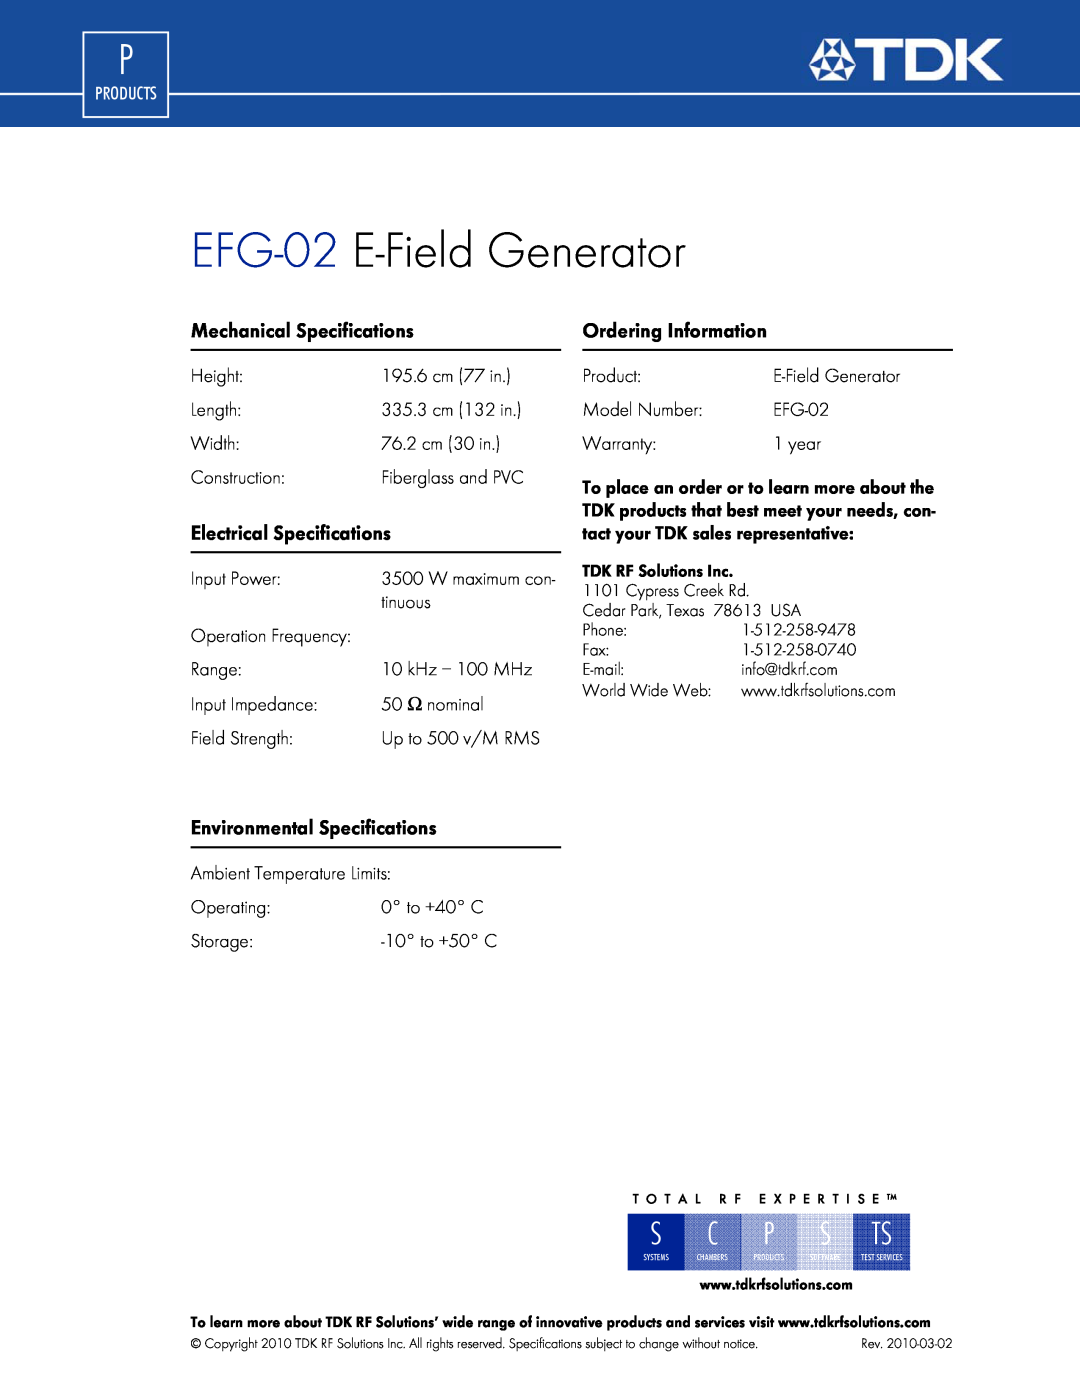 TDK EFG-02 manual Mechanical Specifications, Ordering Information, Electrical Specifications, Environmental Specifications 